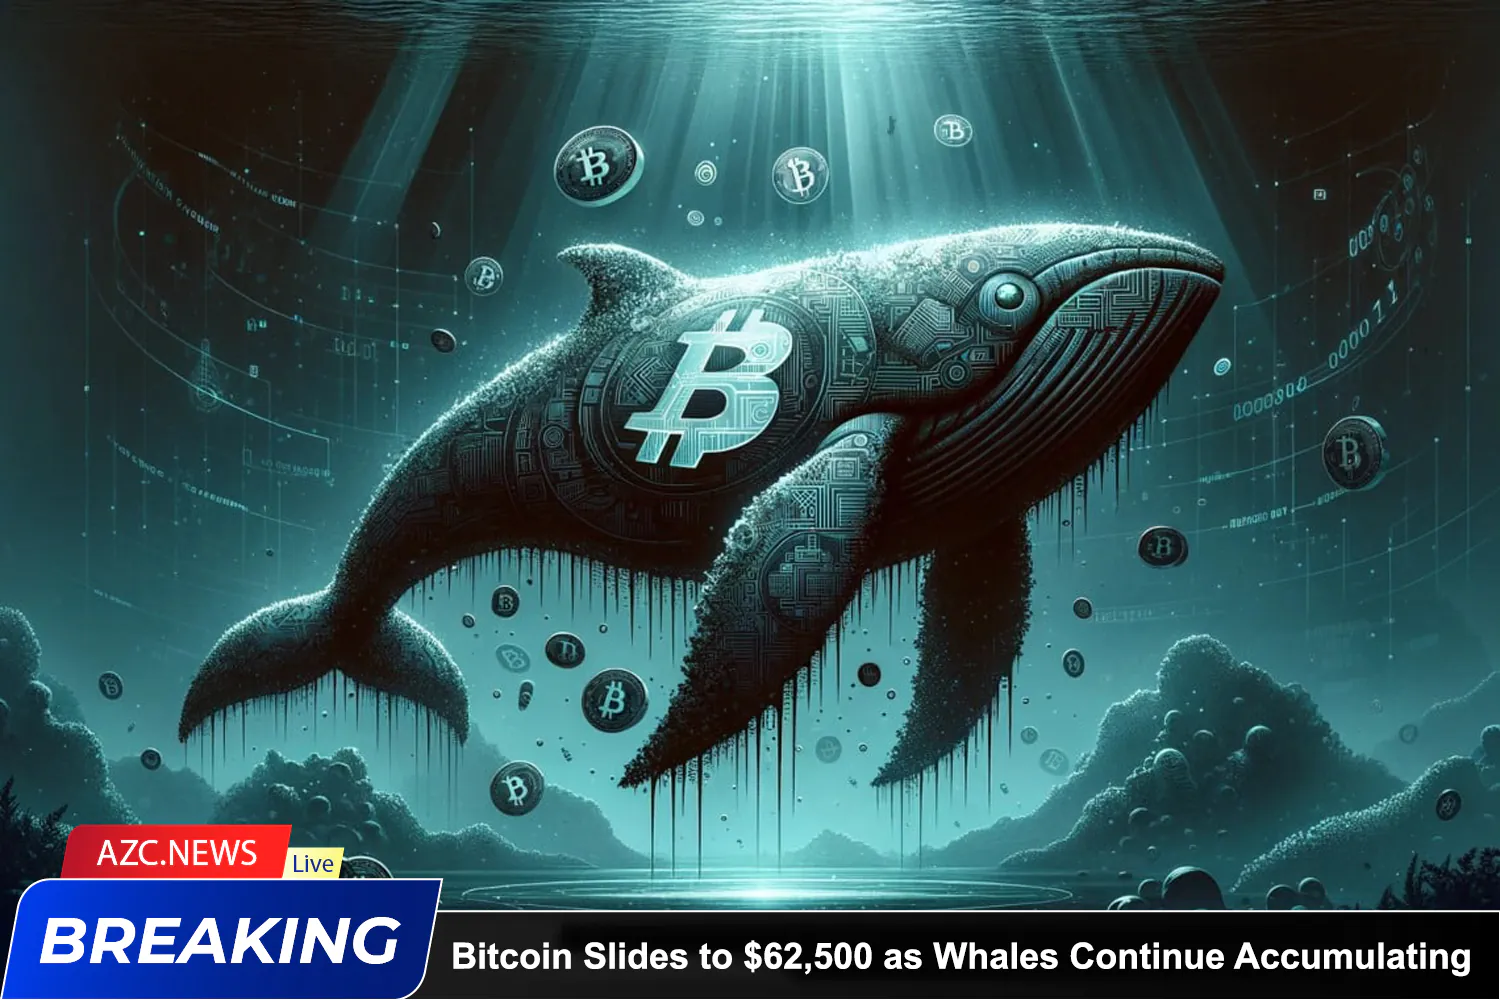 Azcnews Bitcoin Slides To $62,500 As Whales Continue Accumulating